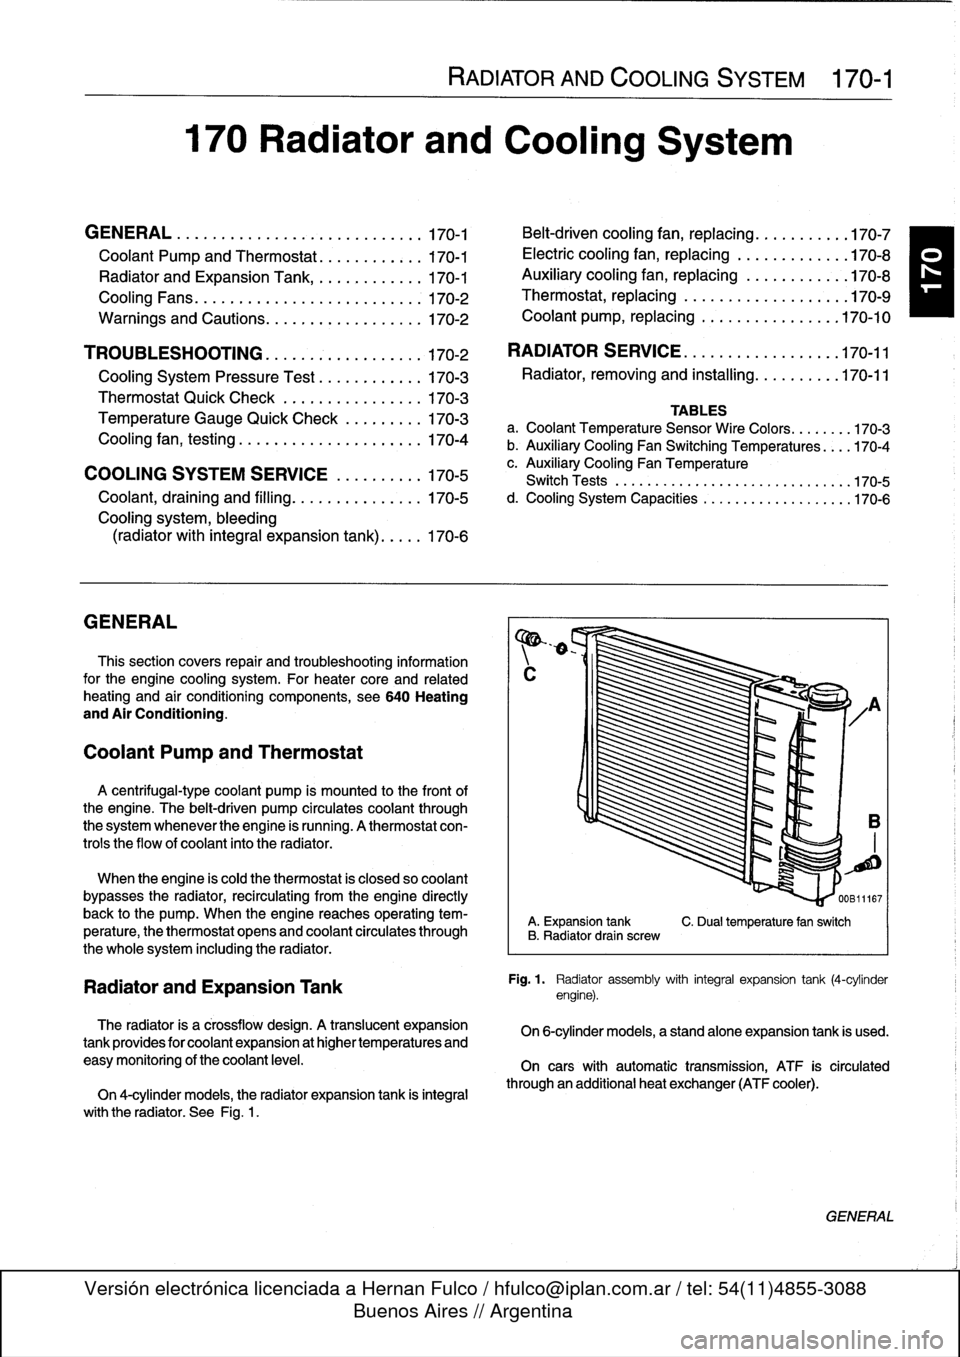 BMW 328i 1998 E36 Workshop Manual 170
Radiator
and
Cooling
System

GENERAL
.
.
.....
.
...
.
.
.
.
.
....
.
.
.
.
.
.
.
.170-1

Coolant
Pump
and
Thermostat
........
.
.
.
.
170-1

Radiator
and
Expansion
Tank
.........
.
...
170-1

Coo